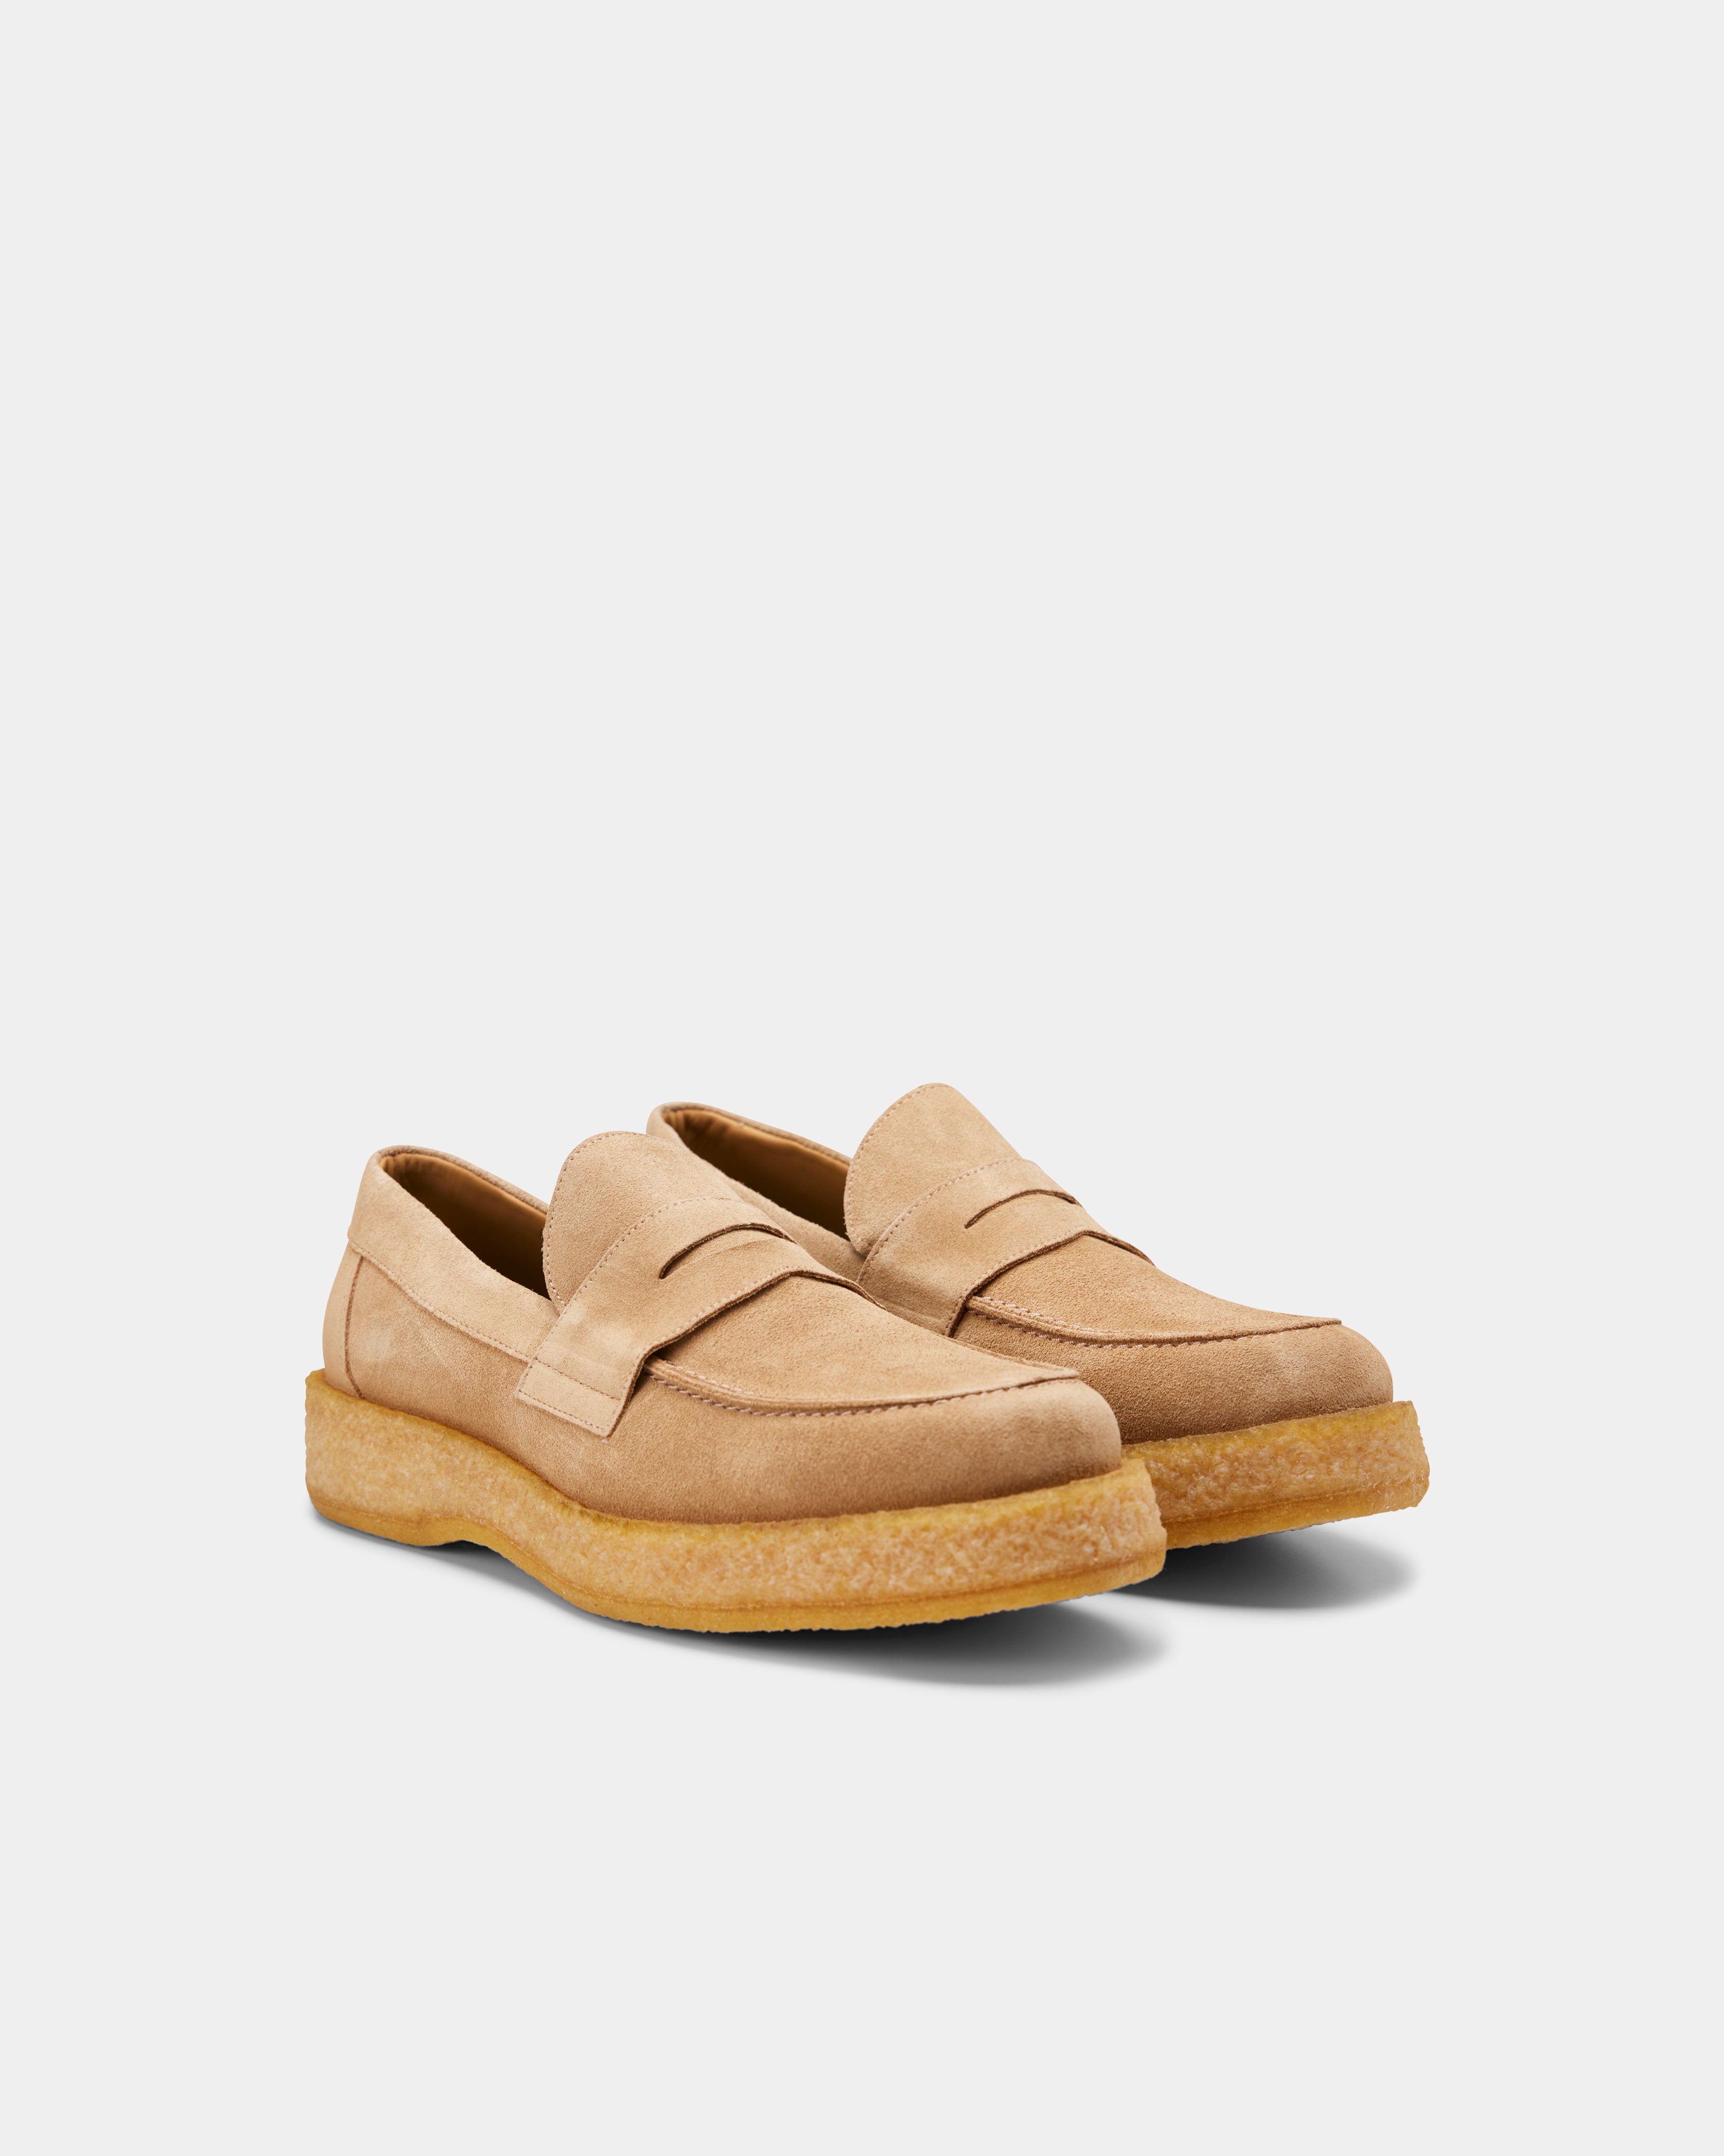 Women's Creeper in sand suede